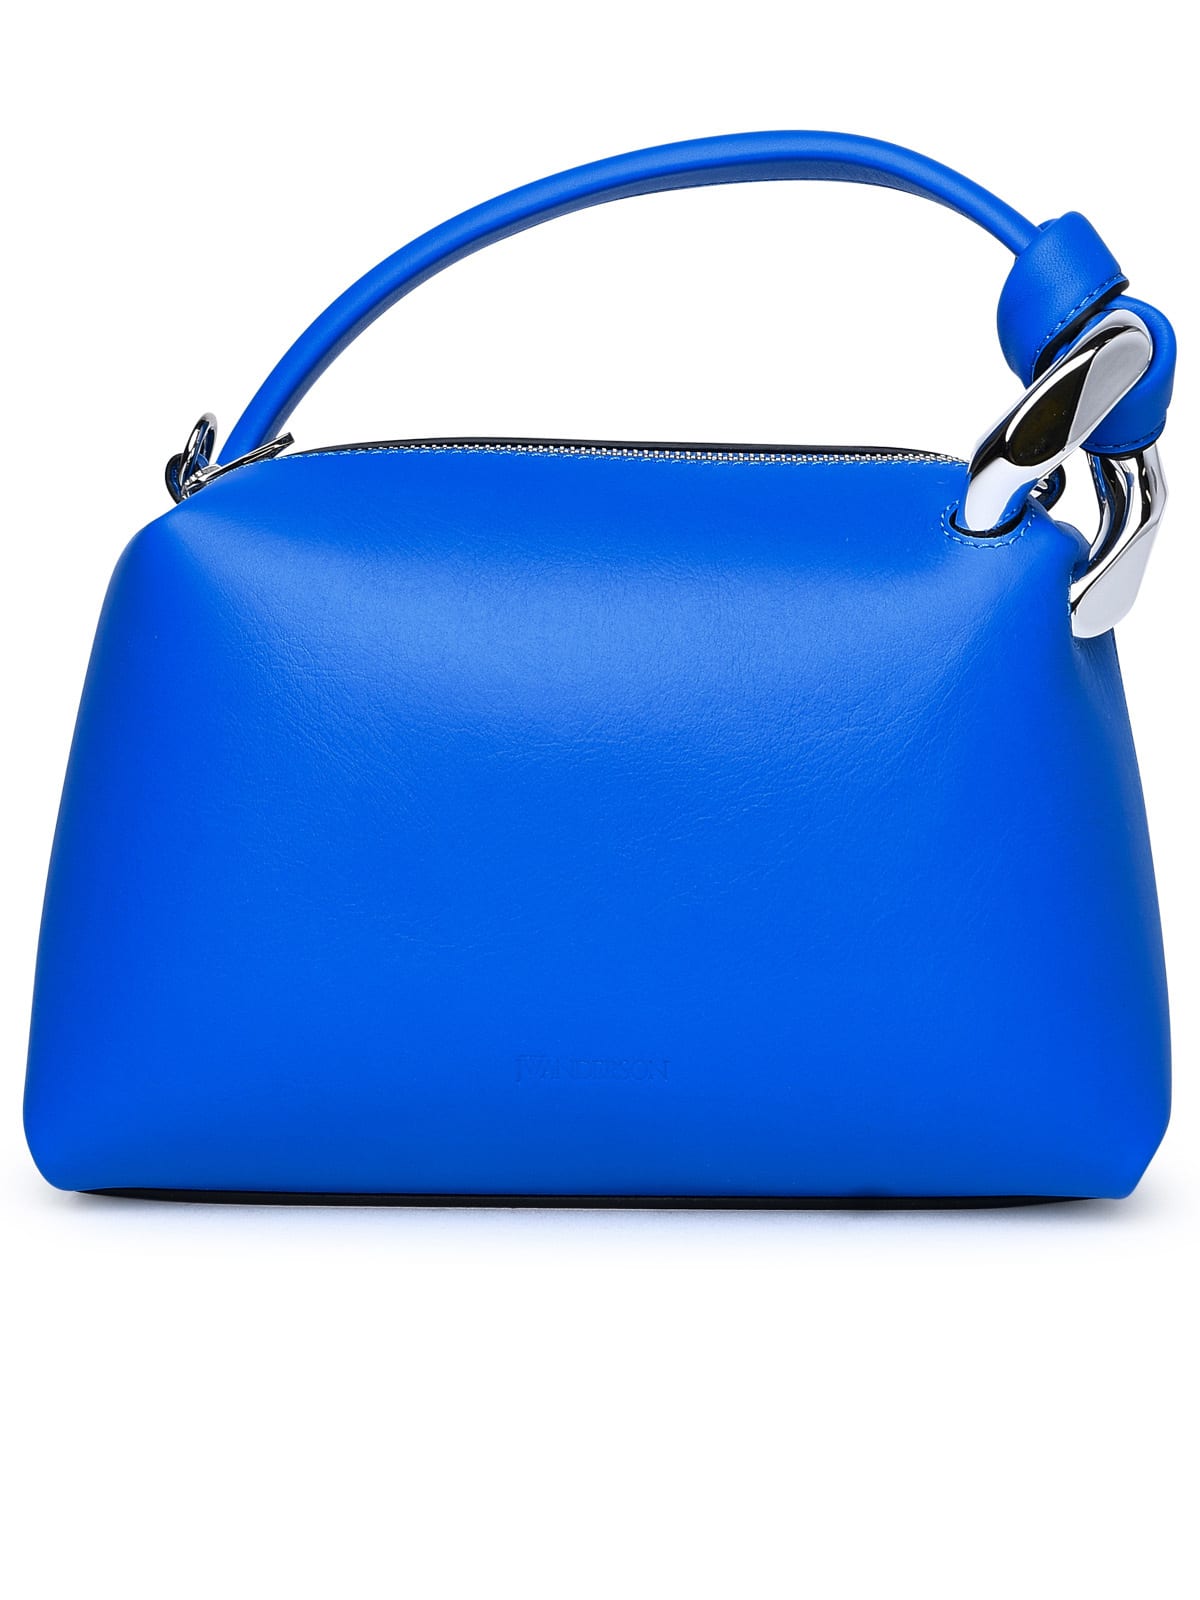 J.W. Anderson Blue Leather Bag